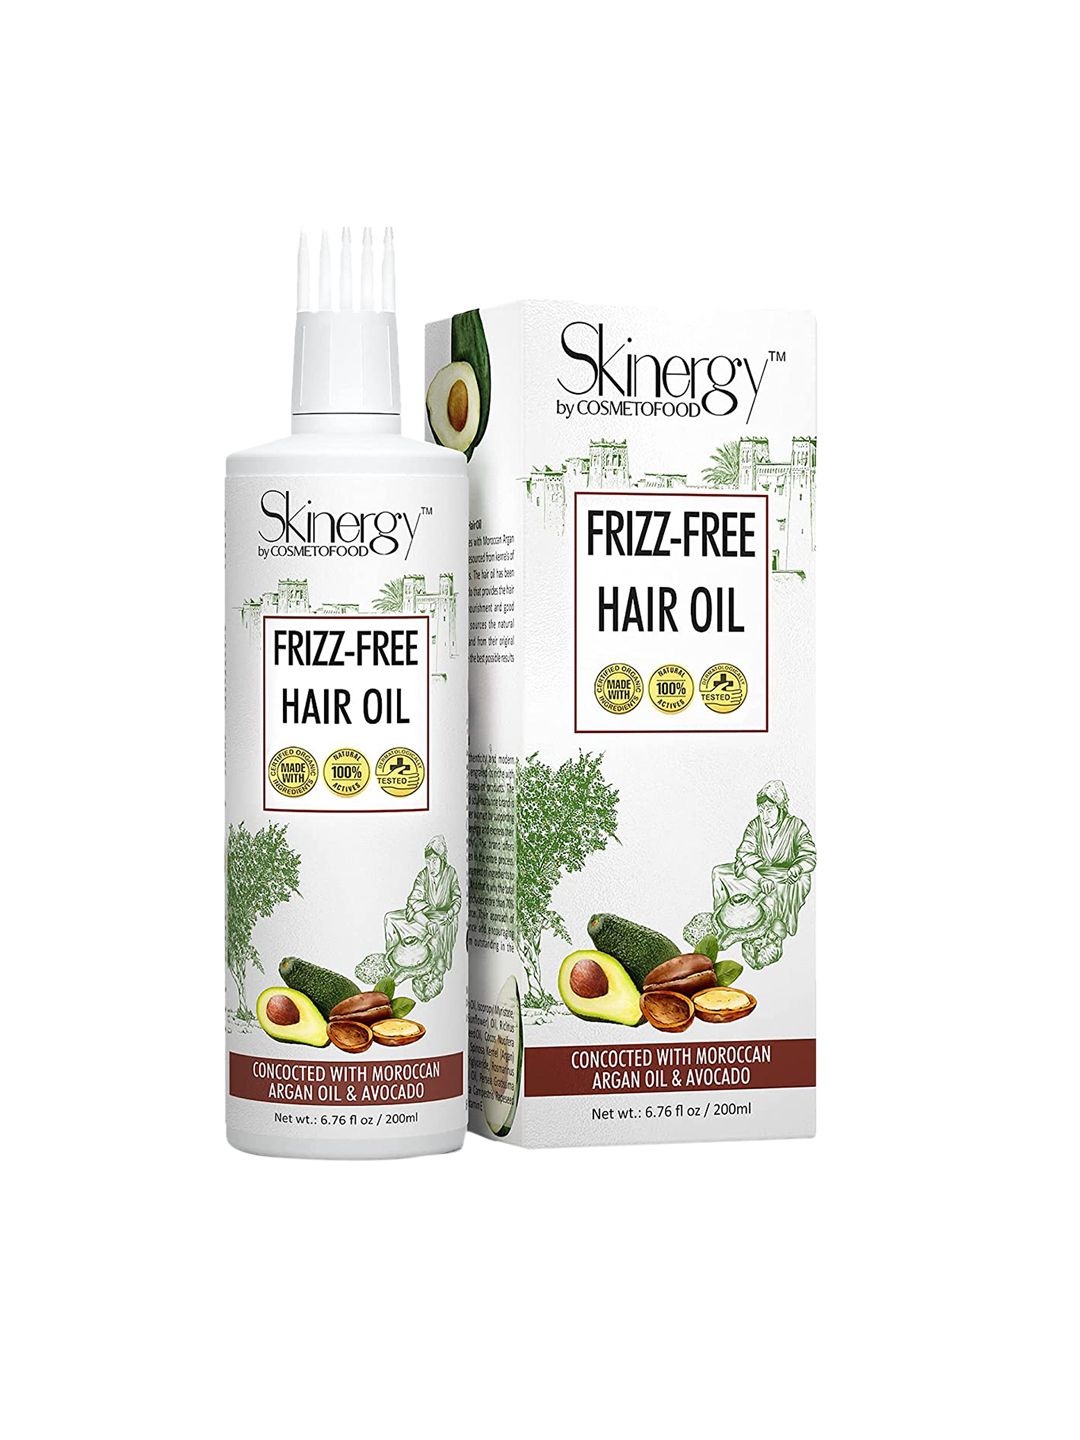 COSMETOFOOD Skinergy Frizz-free Hair Oil with Moroccan Argan Oil & Avocado 200 ml Price in India